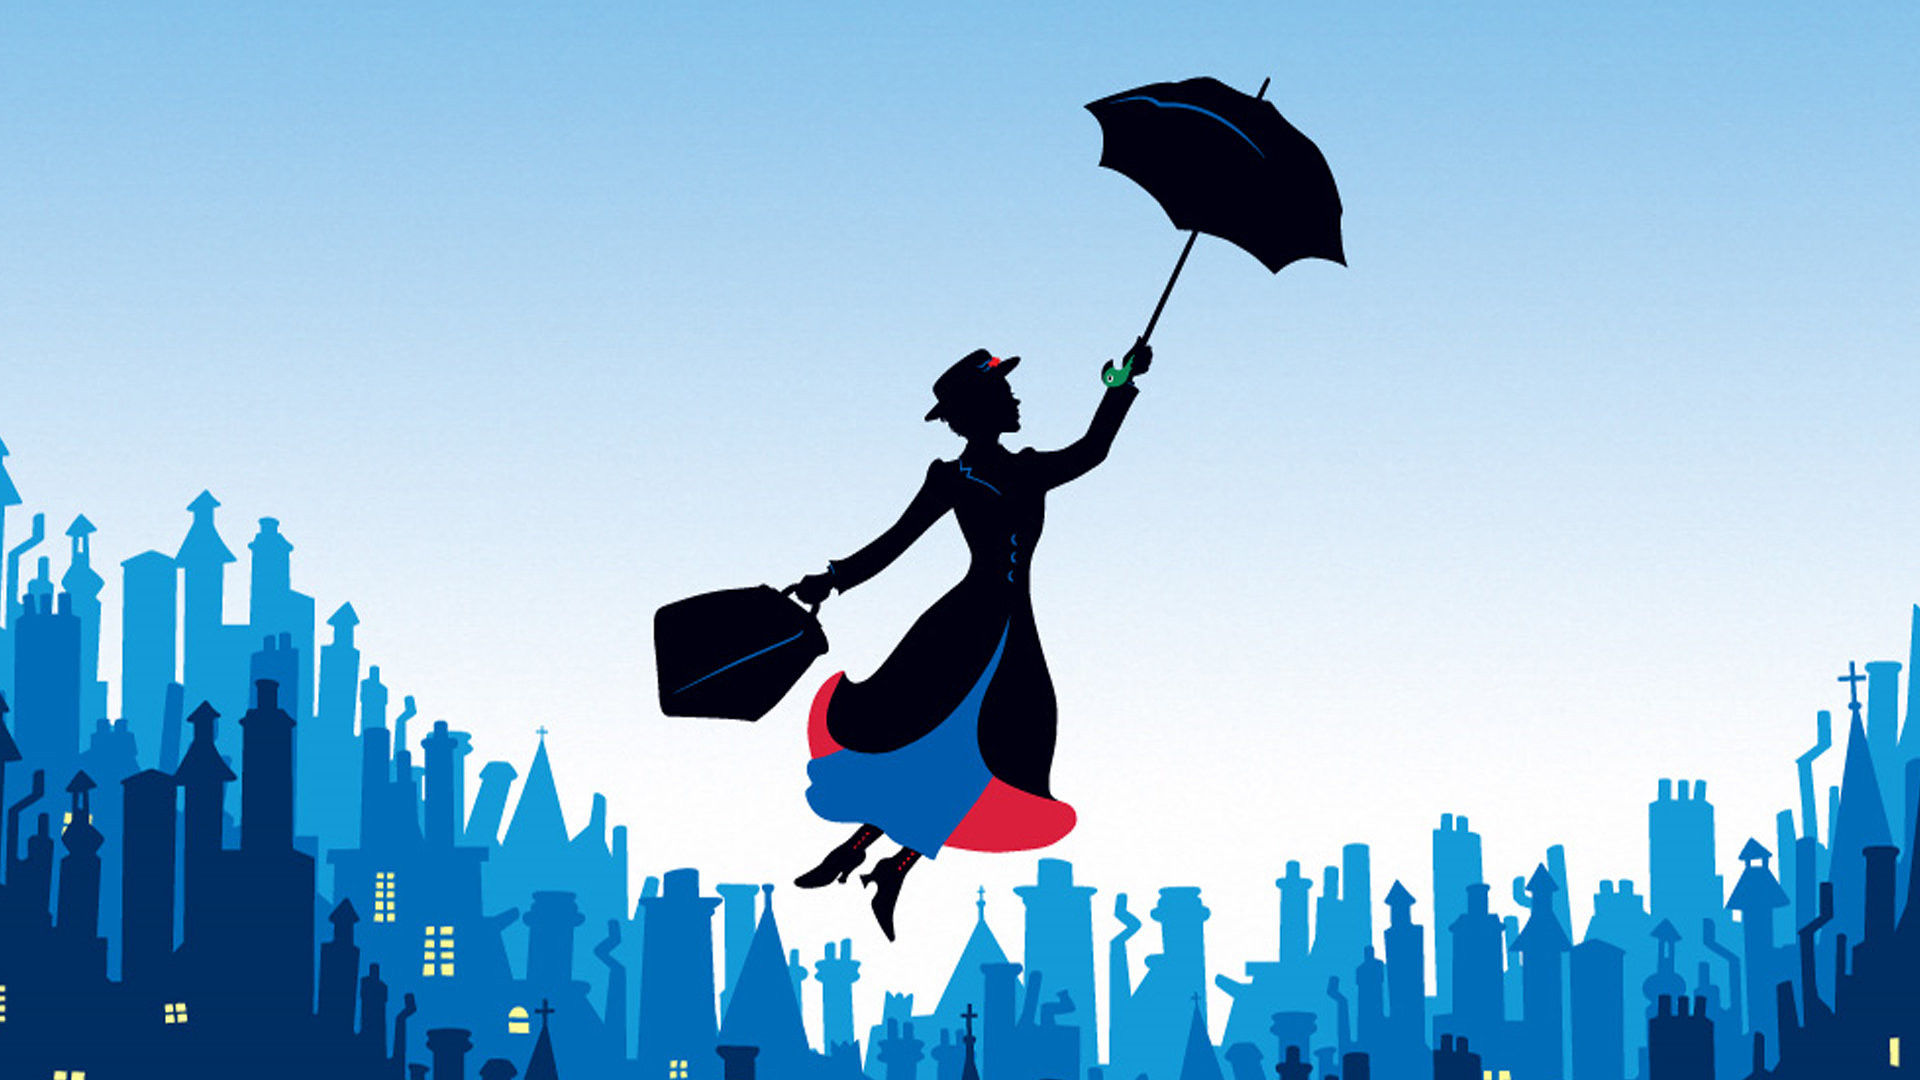 disney is making a new mary poppins movie here s why this is a good thing 615822